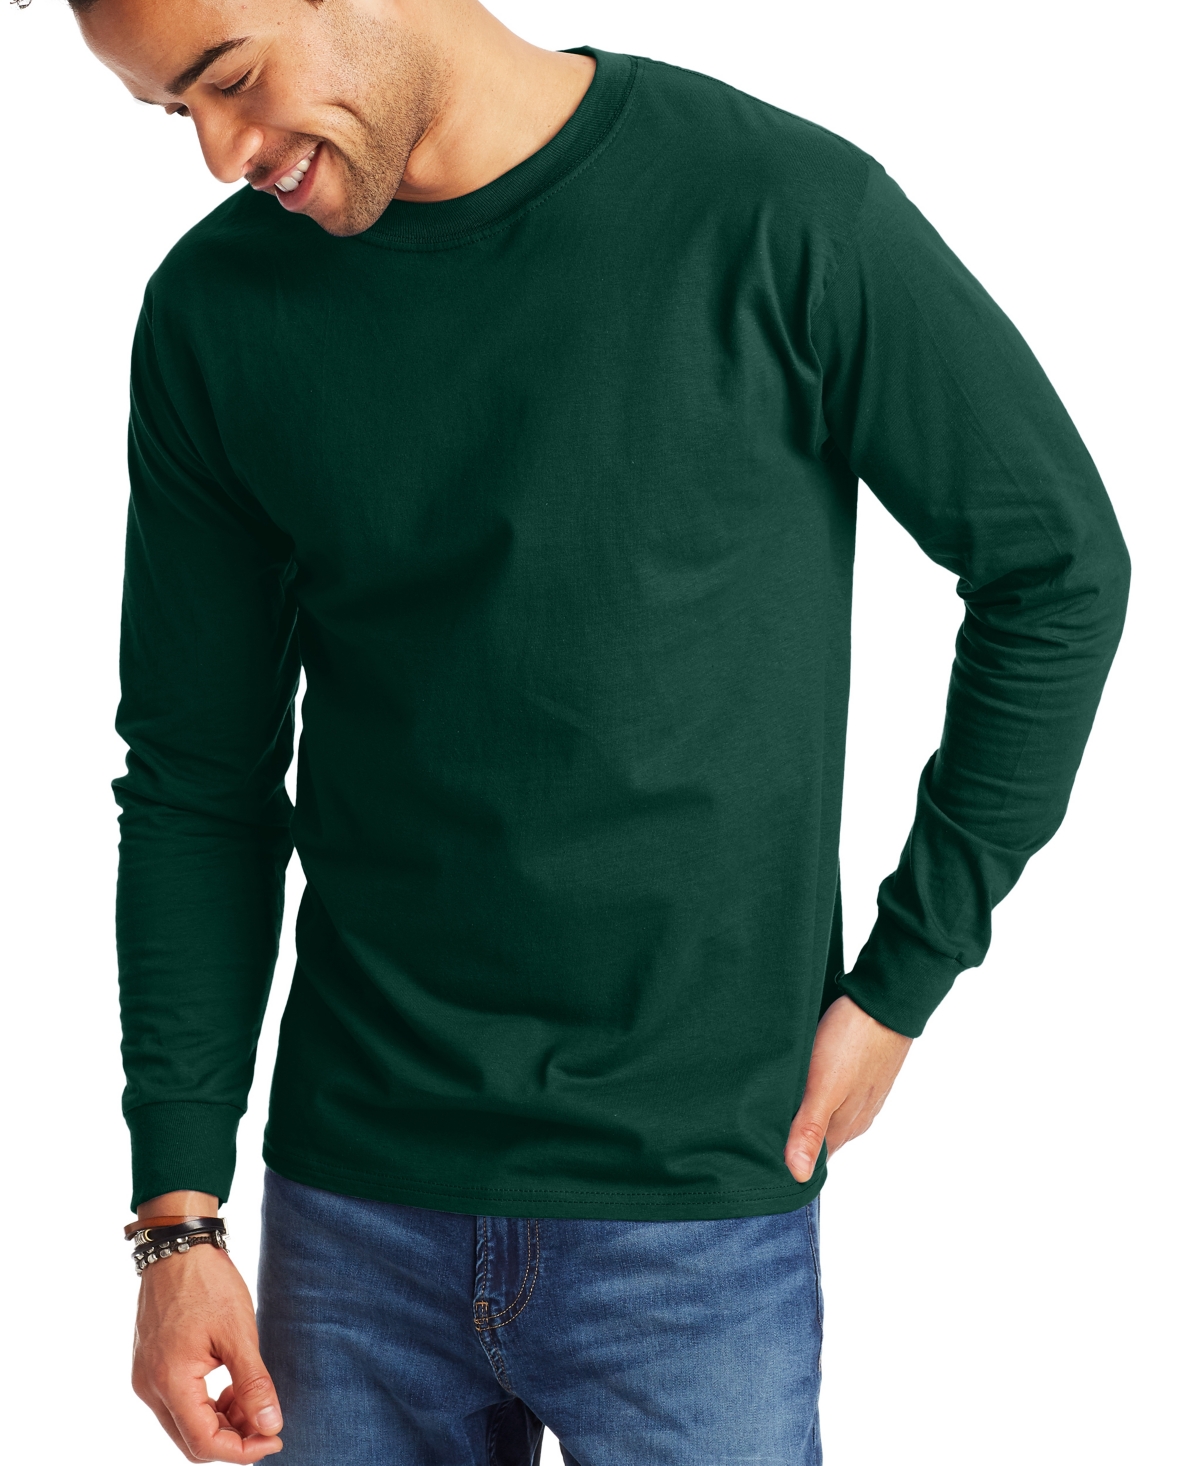 Hanes Beefy-t Unisex Long-sleeve T-shirt, 2-pack In Green